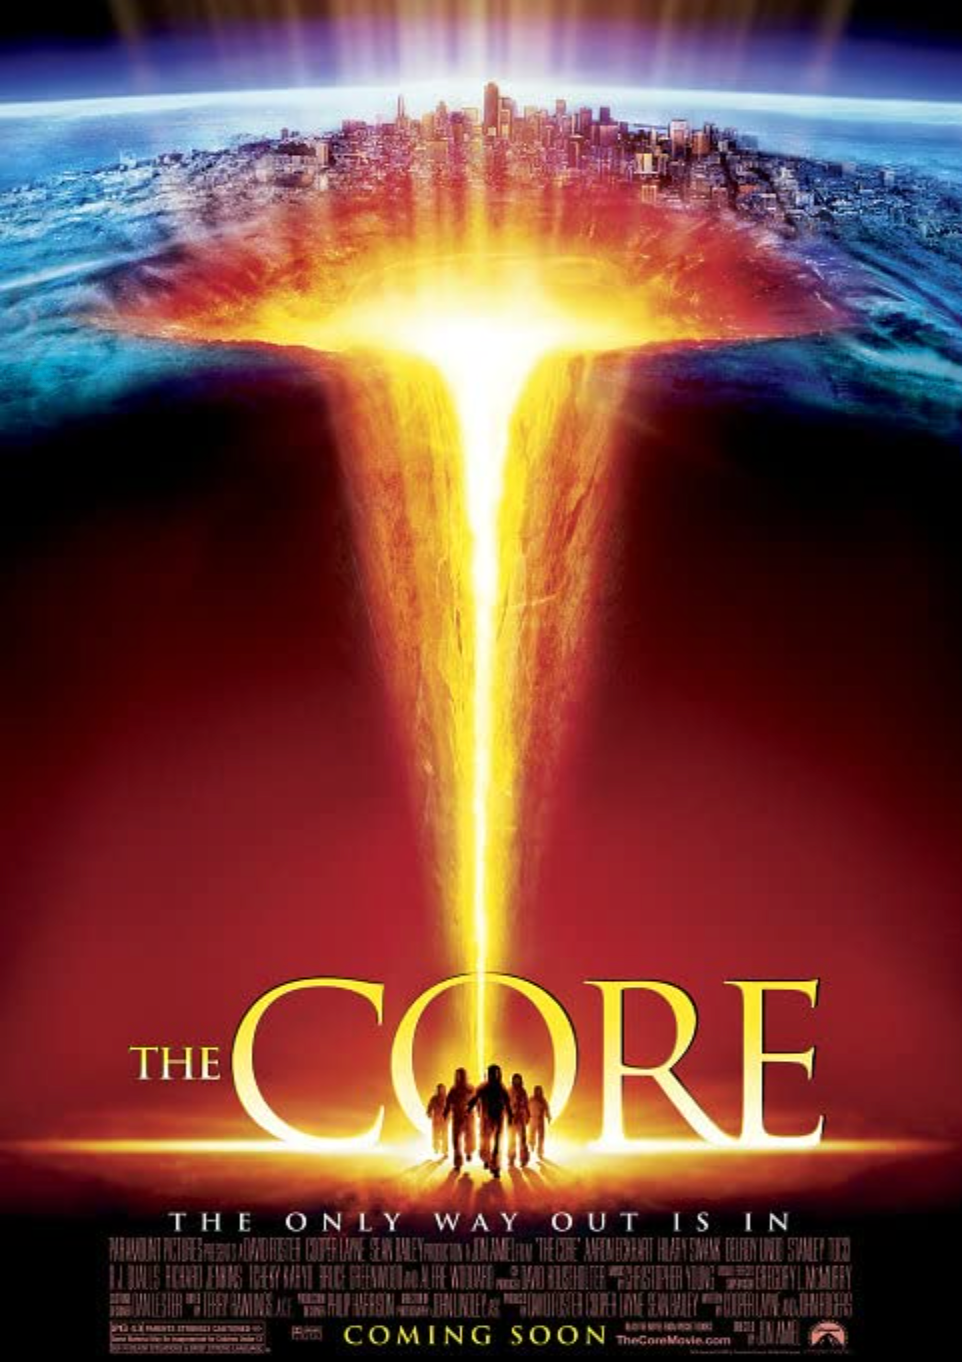 Movie poster for the movie The Core. The Earth is splitting open, with the shadows of a group of people in the foreground. A tagline beneath the main title states ‘the only way out is in.’